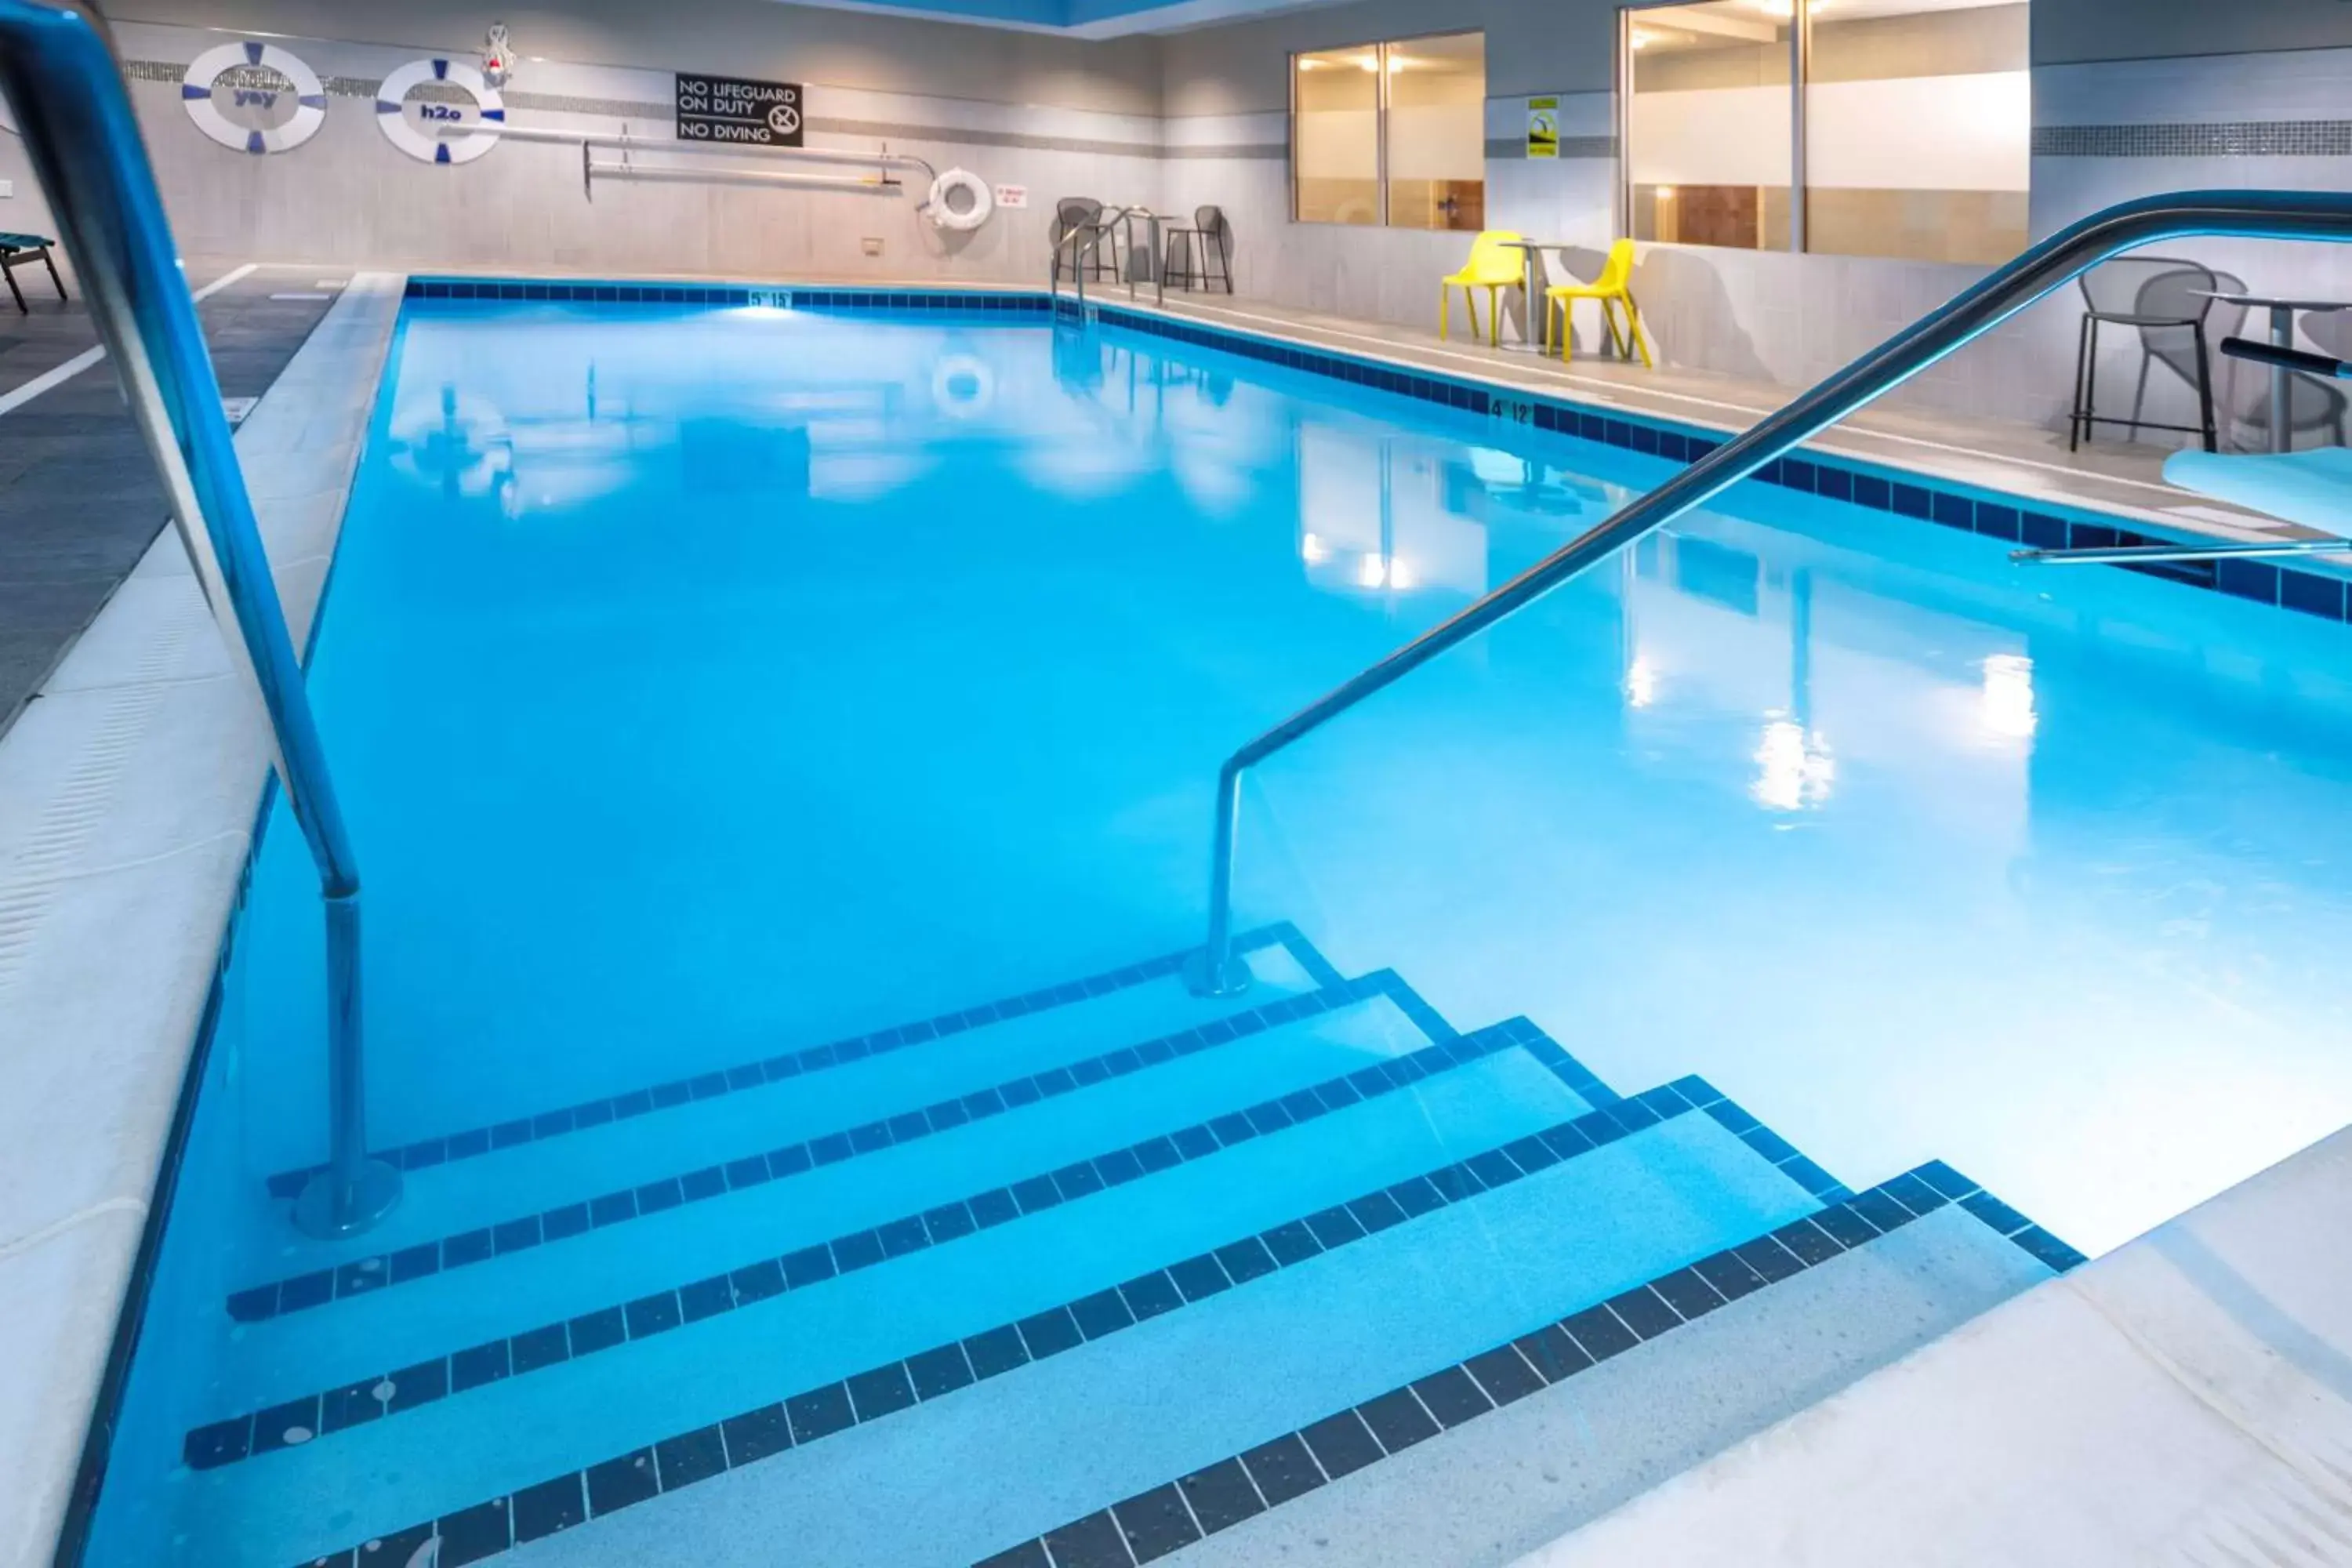 Swimming Pool in Home2 Suites By Hilton Minneapolis-Mall of America